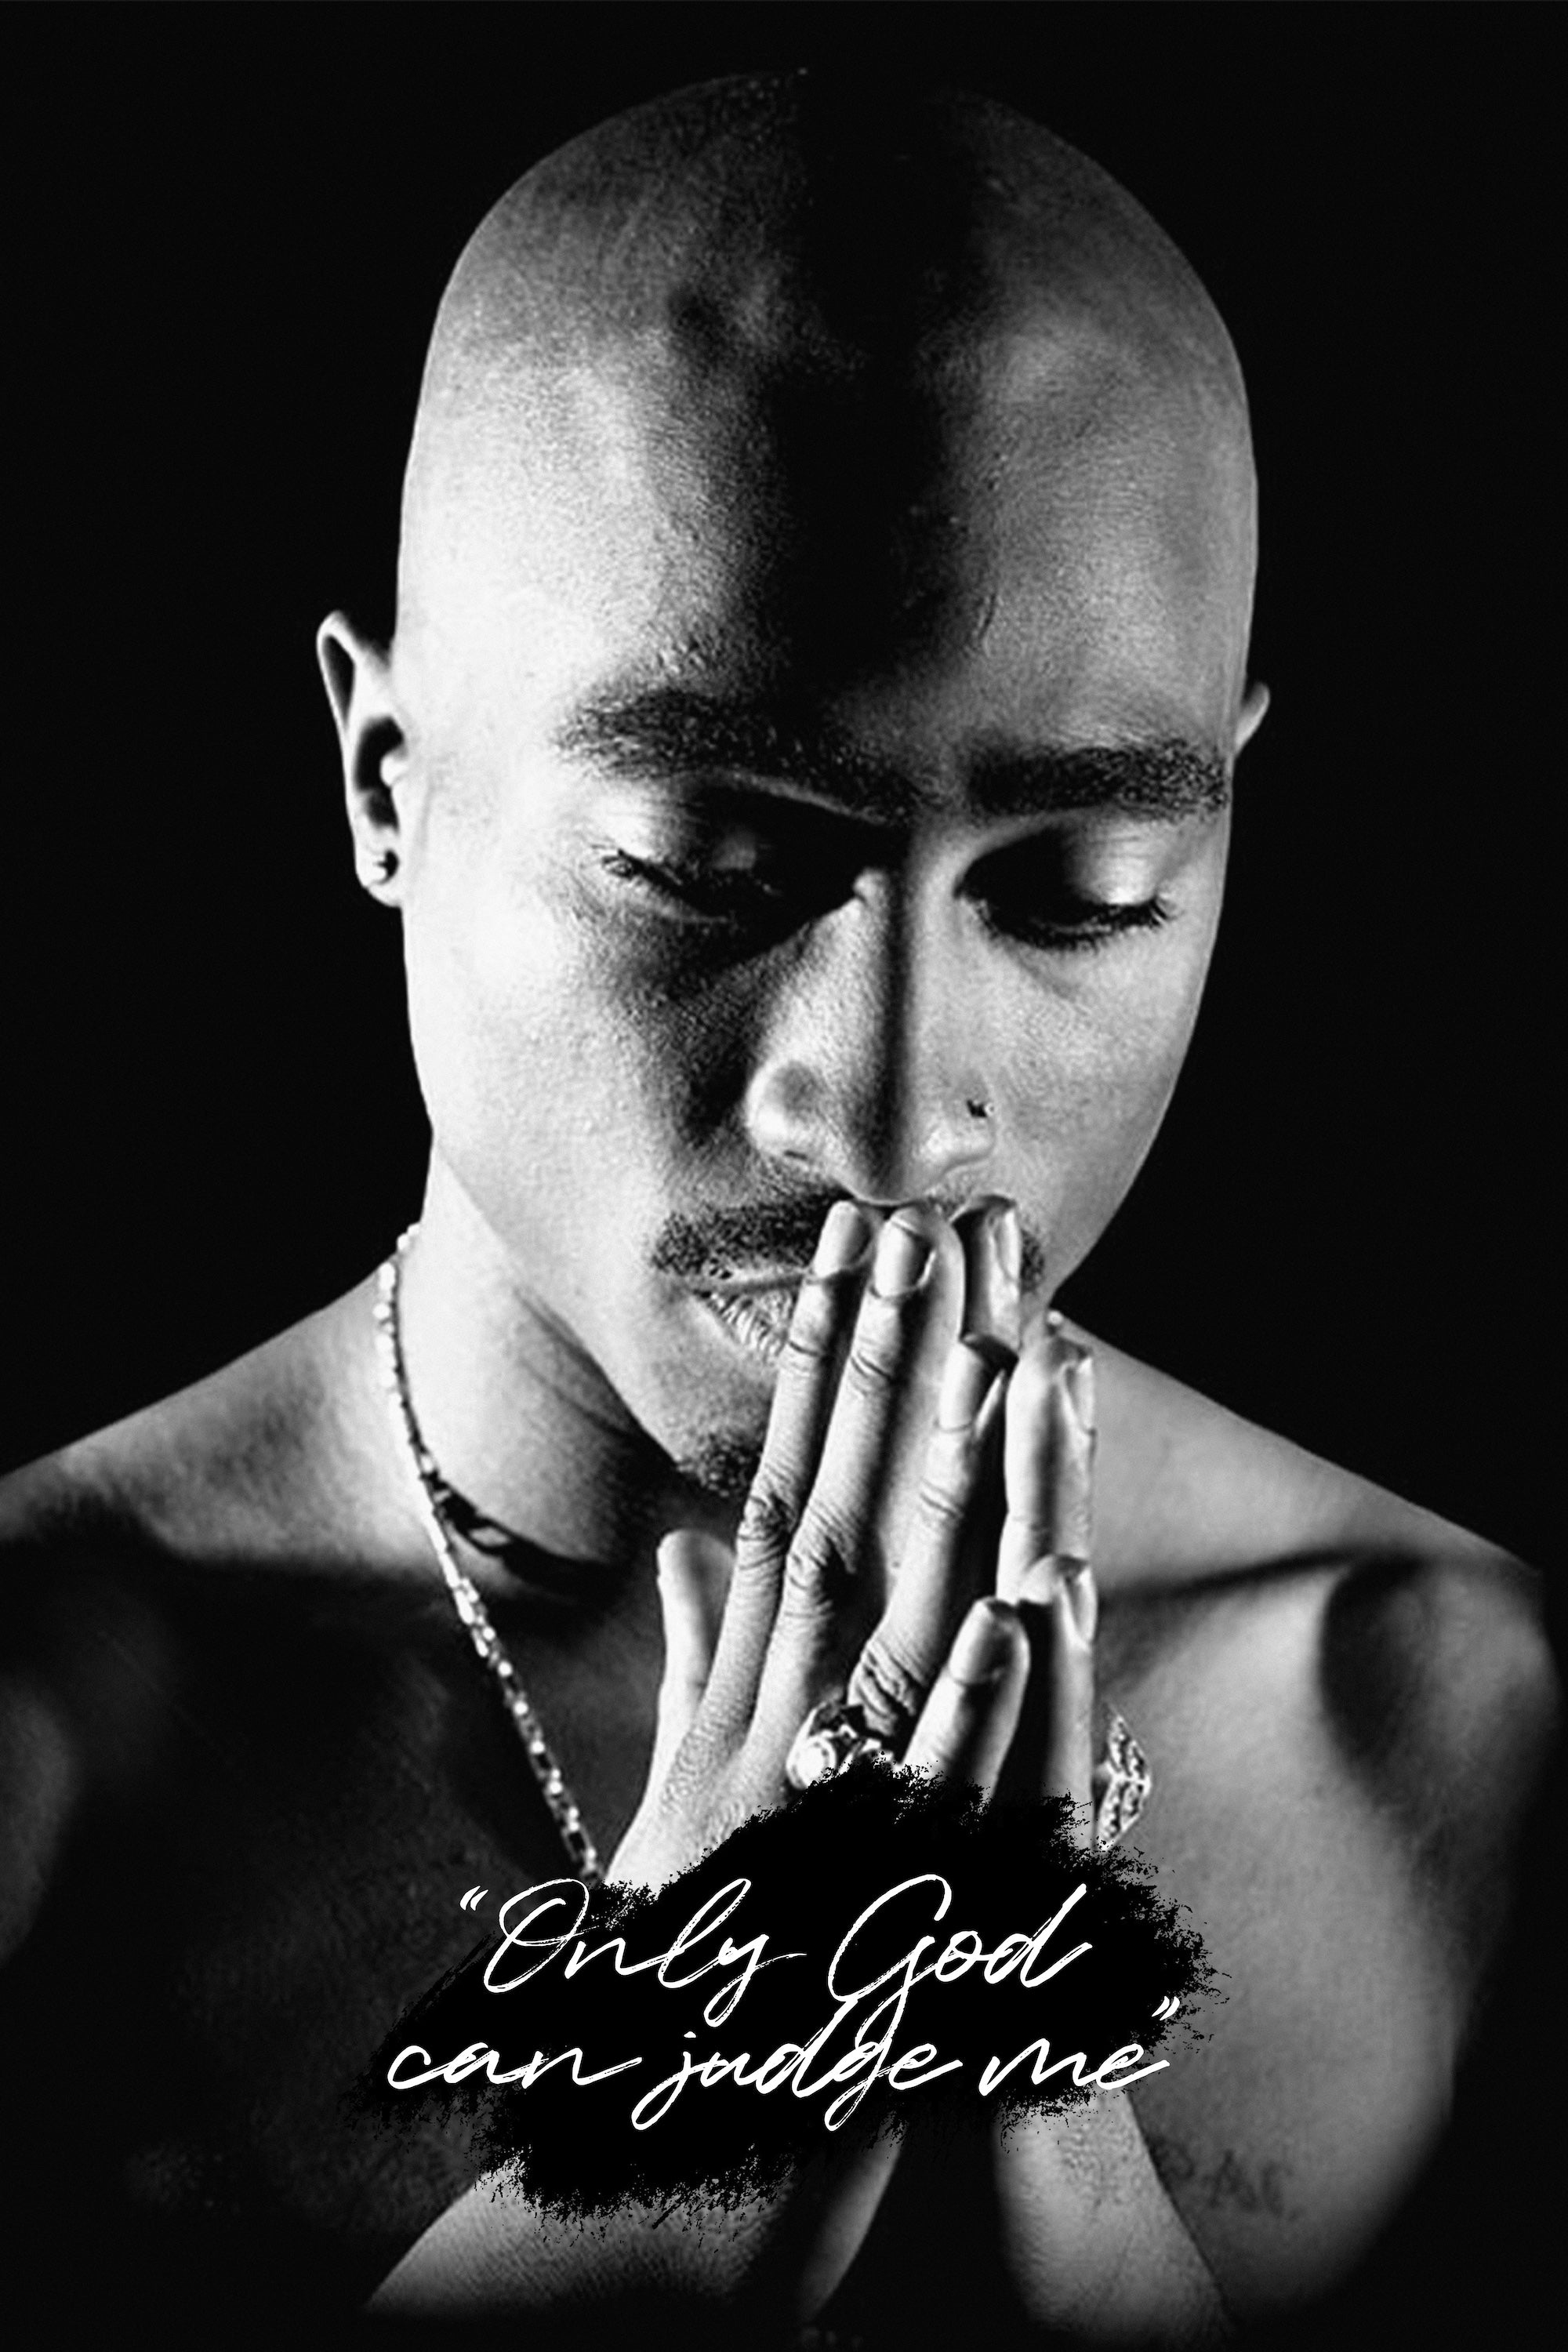 Tupac 'Only God' Poster